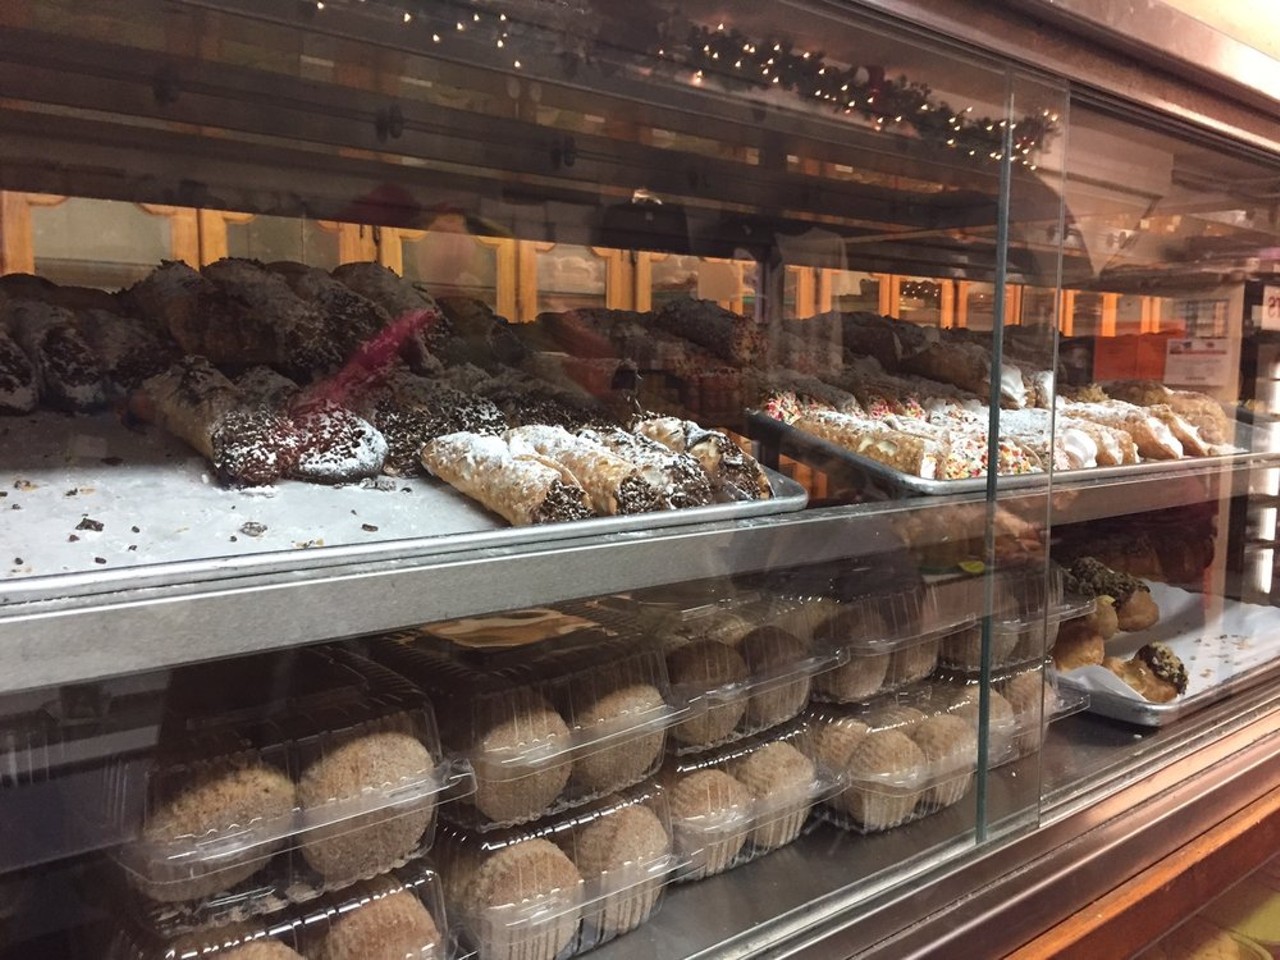 La Gloria Bakery
3345 Bagley Ave., Detroit; 313-842-5722
This bakery has all the sweets one can imagine. Their churros, empanadas, and other baked goodies are sure to please any sweet tooth.
Photo via Yelp User, Jason B.